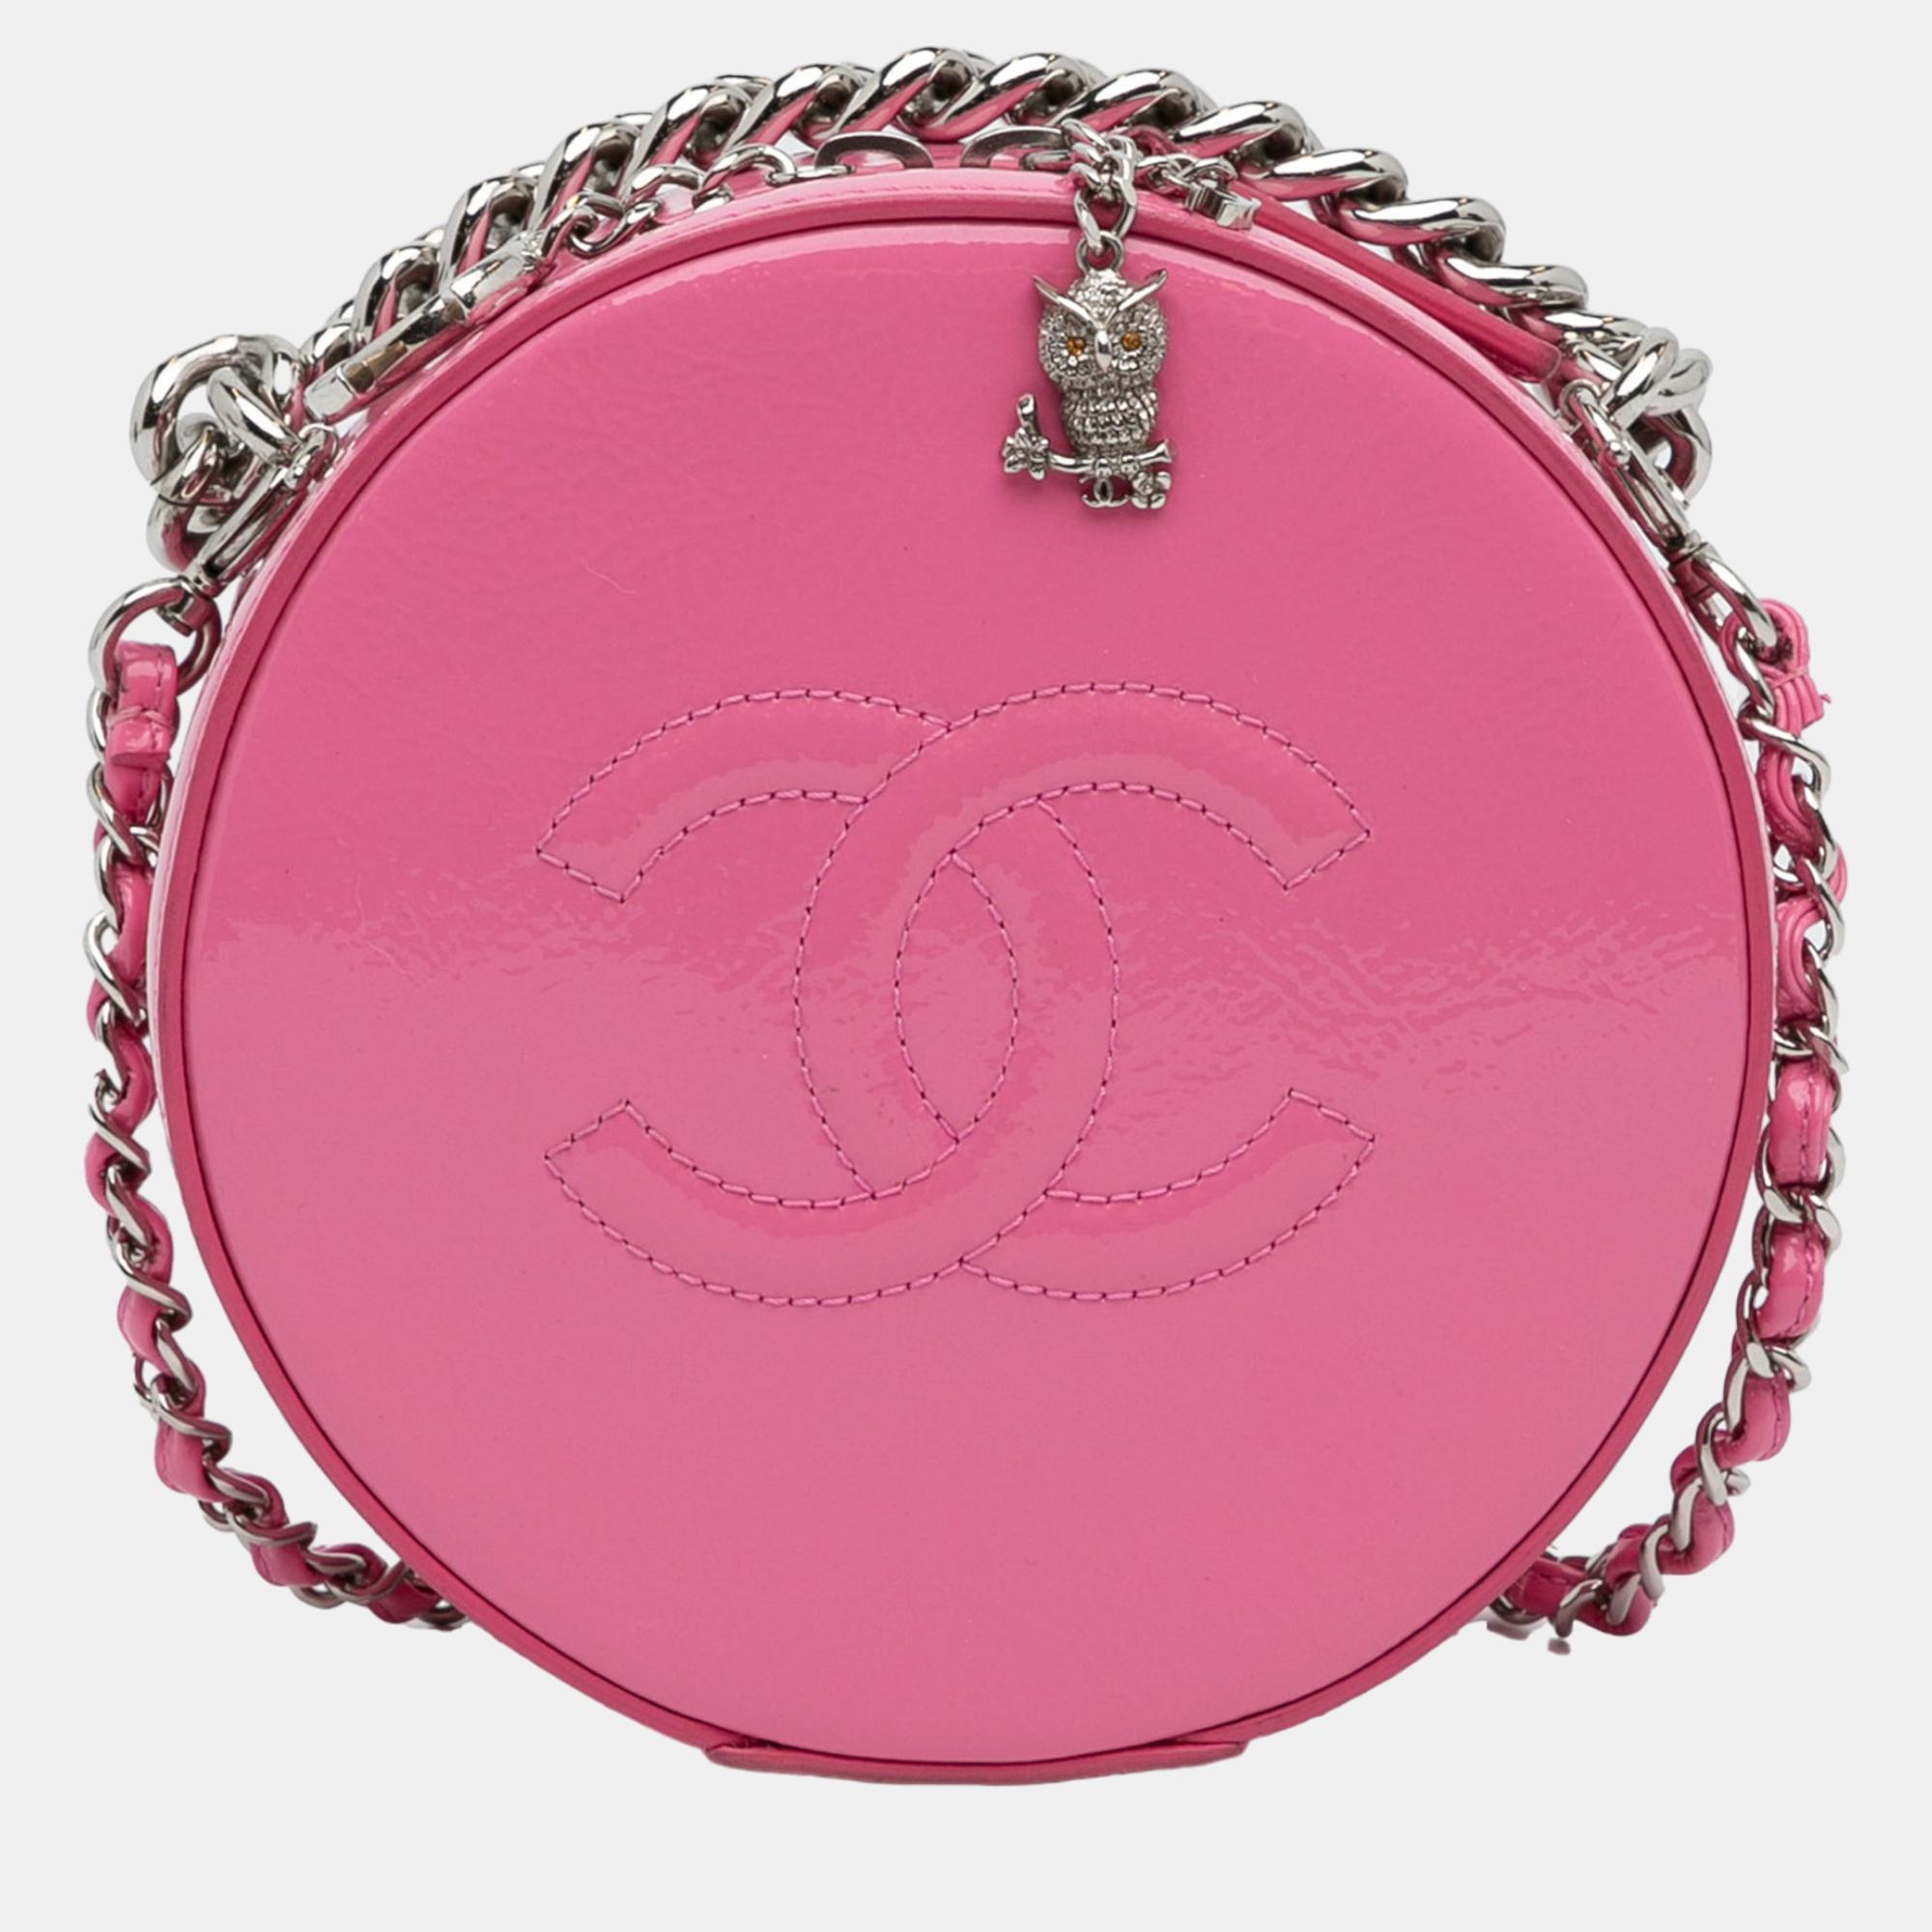 Chanel pink patent round as earth crossbody bag